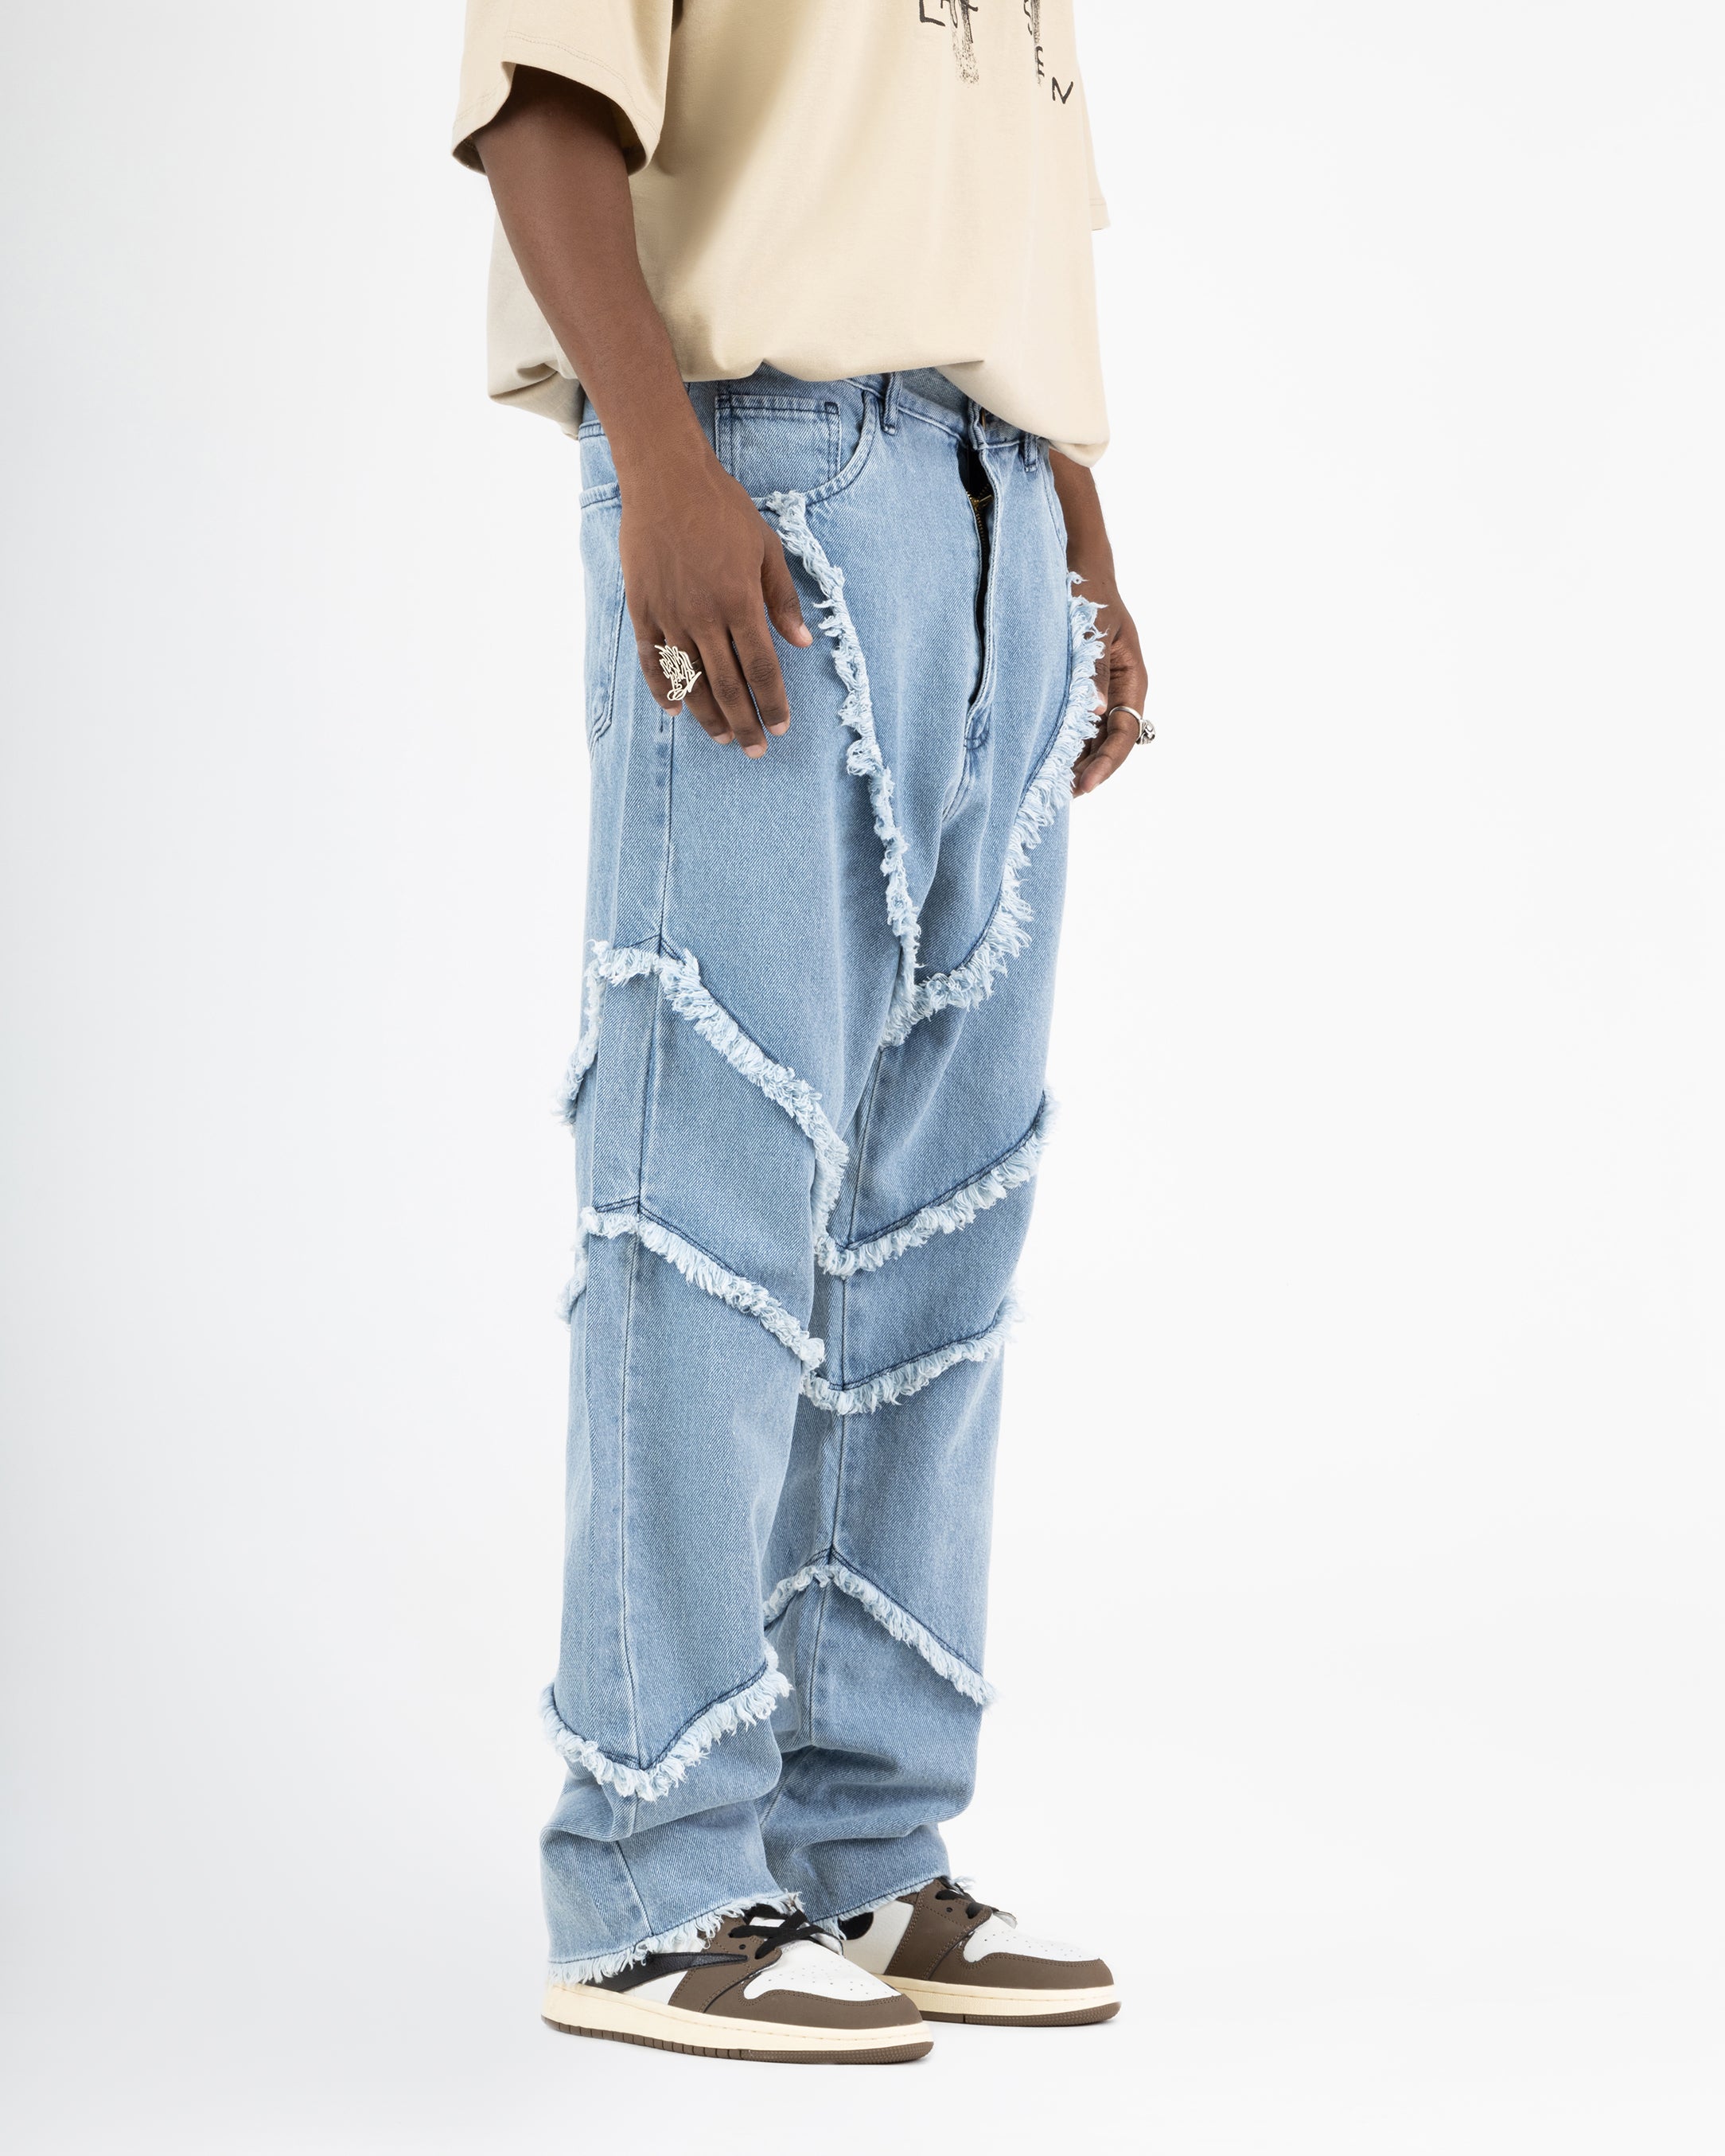 Fuzzy Baggy Fit Jeans